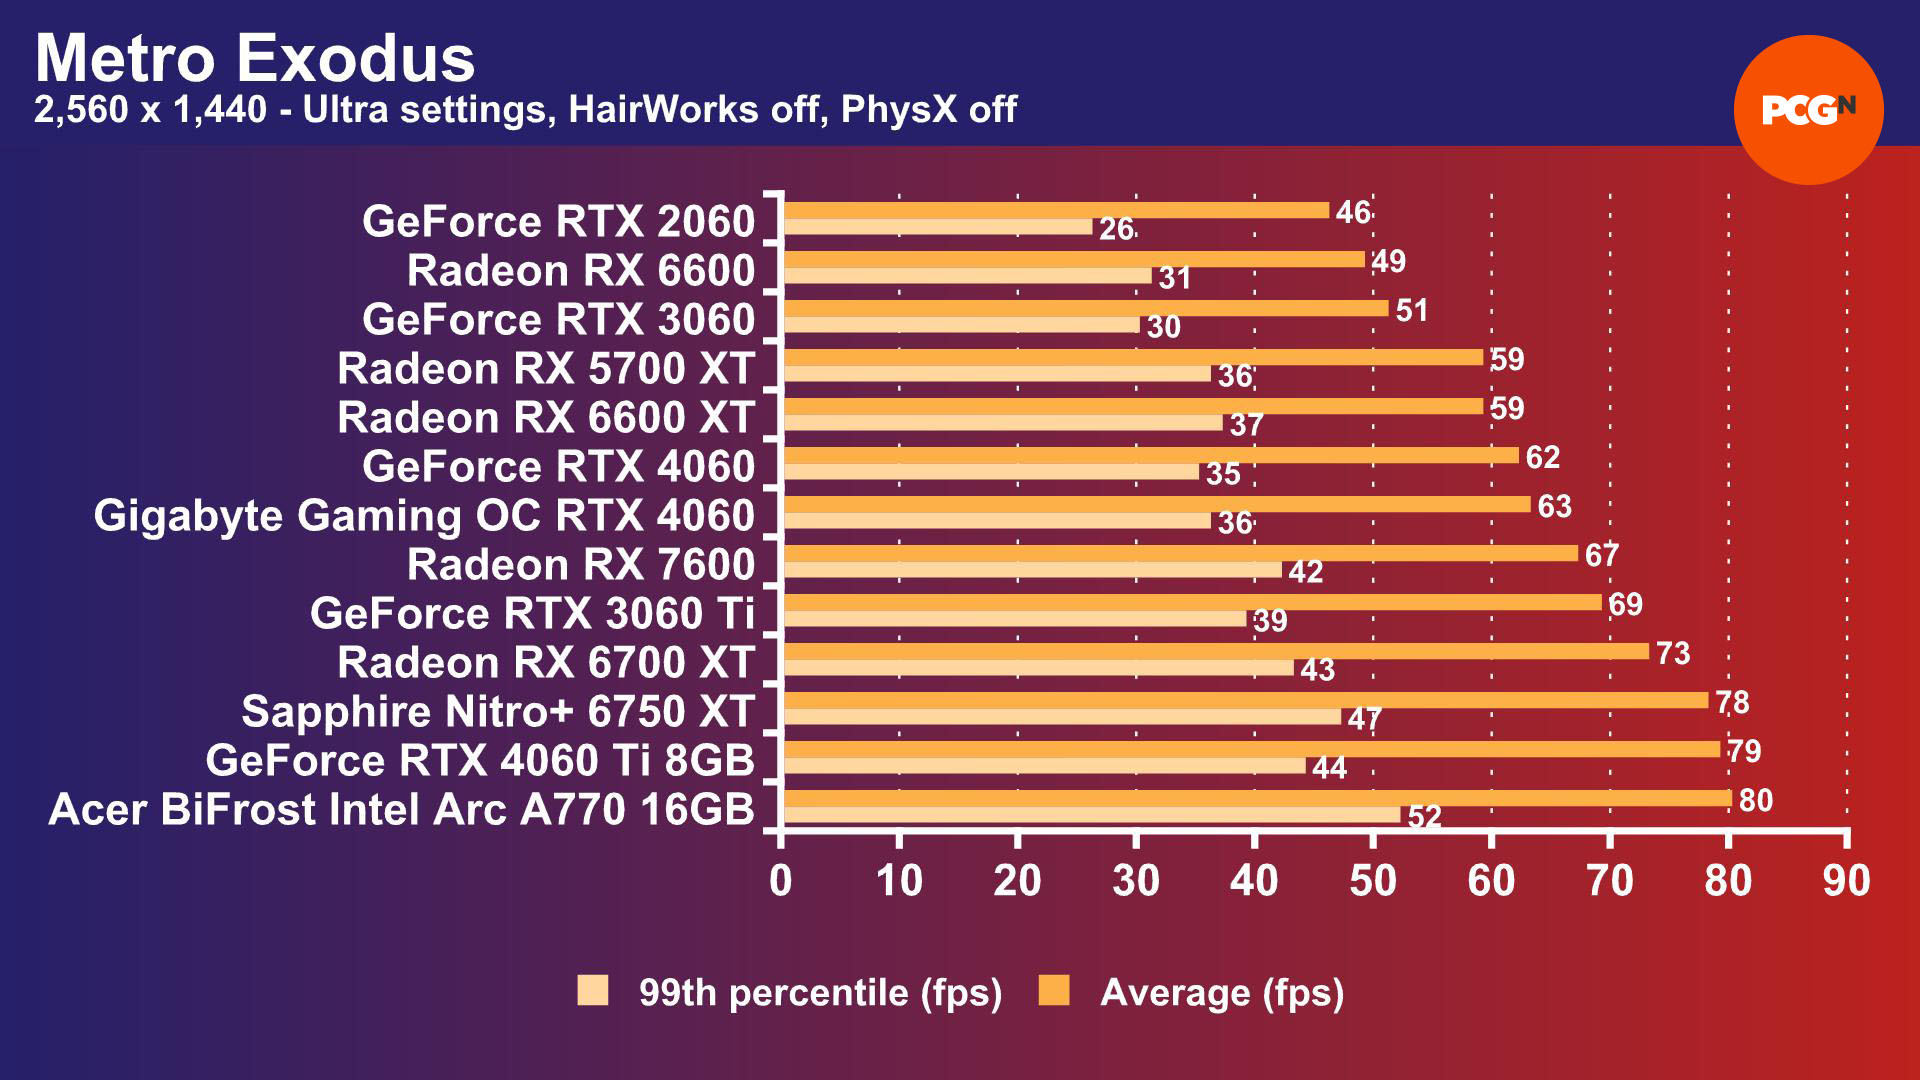 Intel Arc A770 review: Metro Exodus 2,560 x 1,440 benchmark results graph